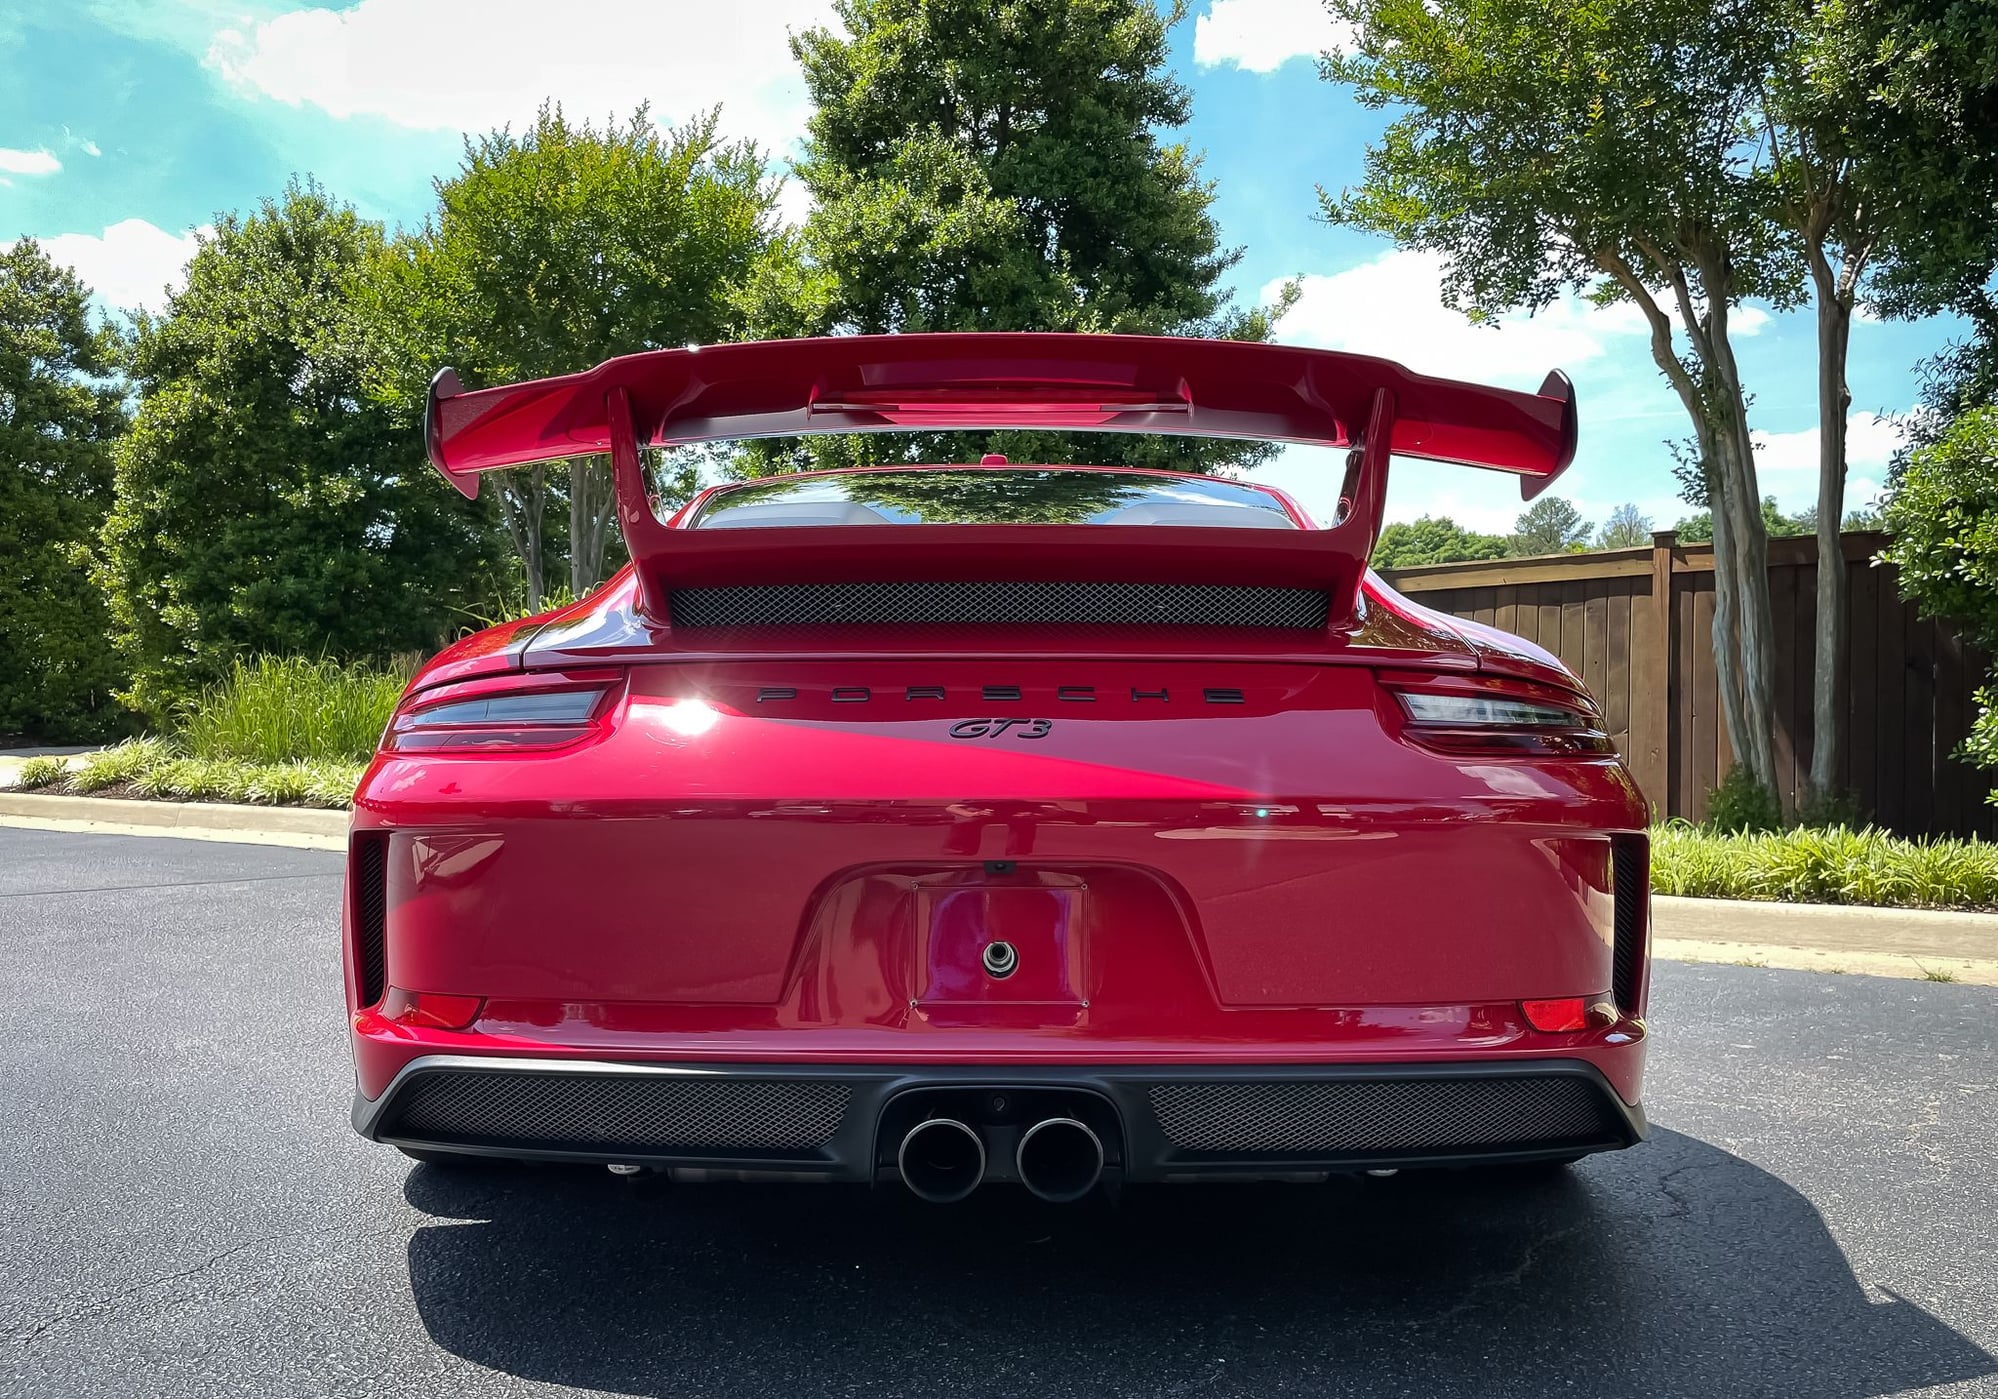 2018 Porsche GT3 - 2018 911 GT3-PDK-BUCKETS-CPO - Used - VIN WP0AC2A98JS174277 - 6,830 Miles - 2WD - Automatic - Coupe - Red - Richmond, VA 23113, United States